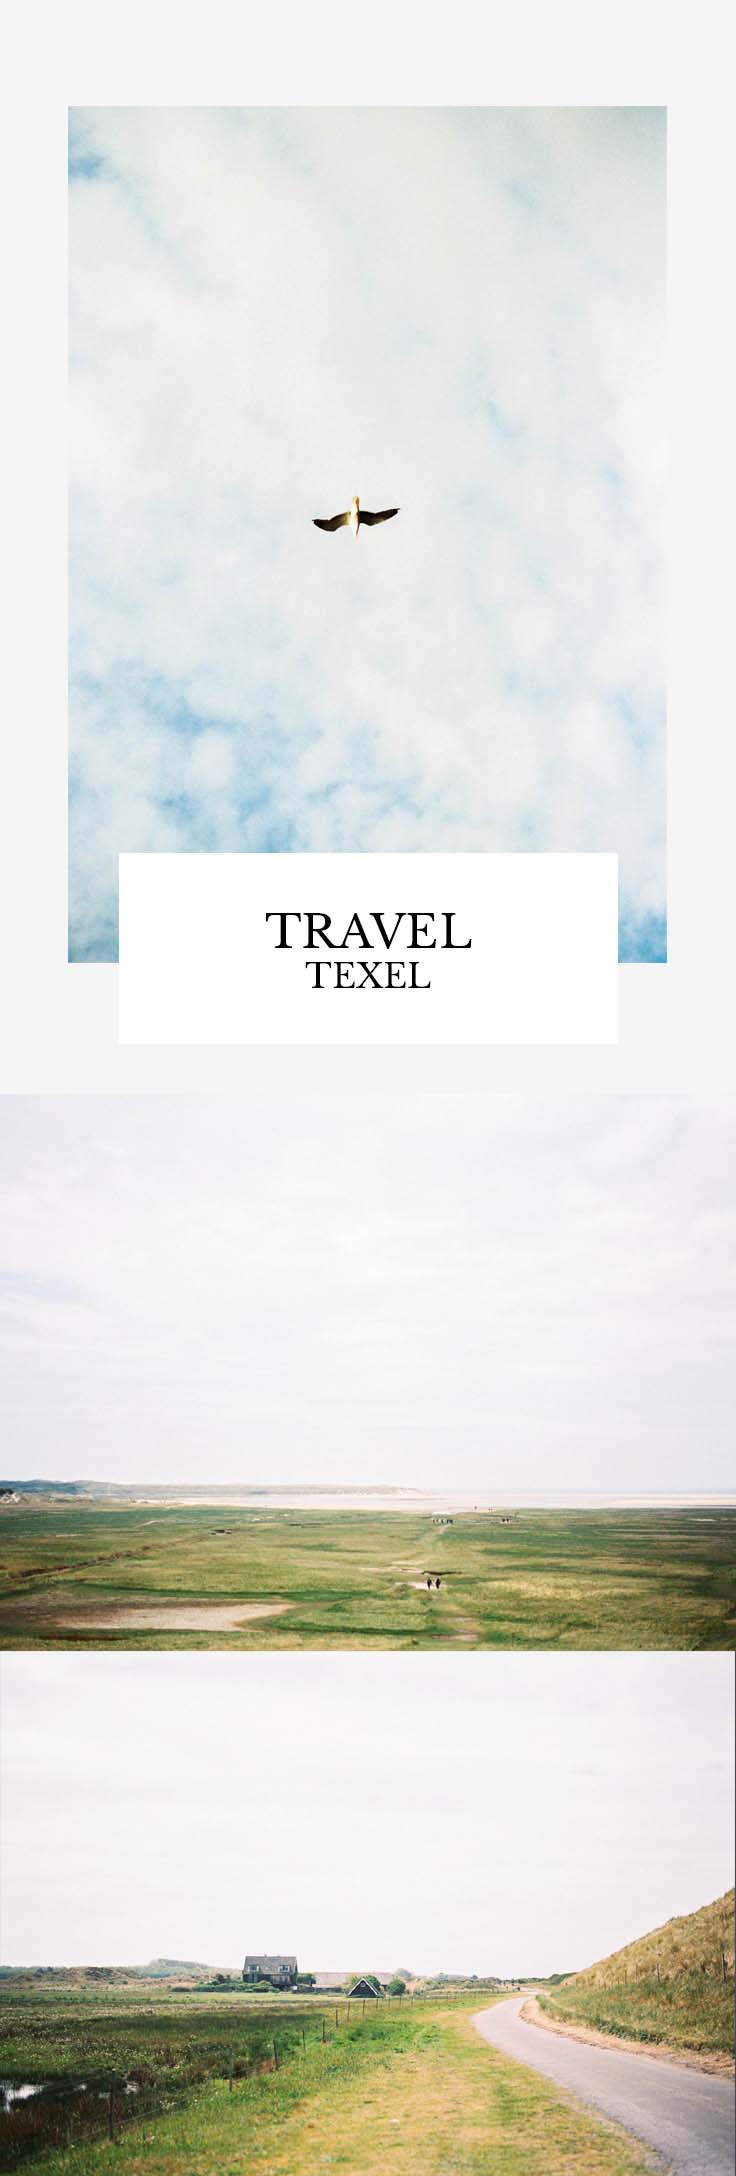 Travel - A getaway to Texel